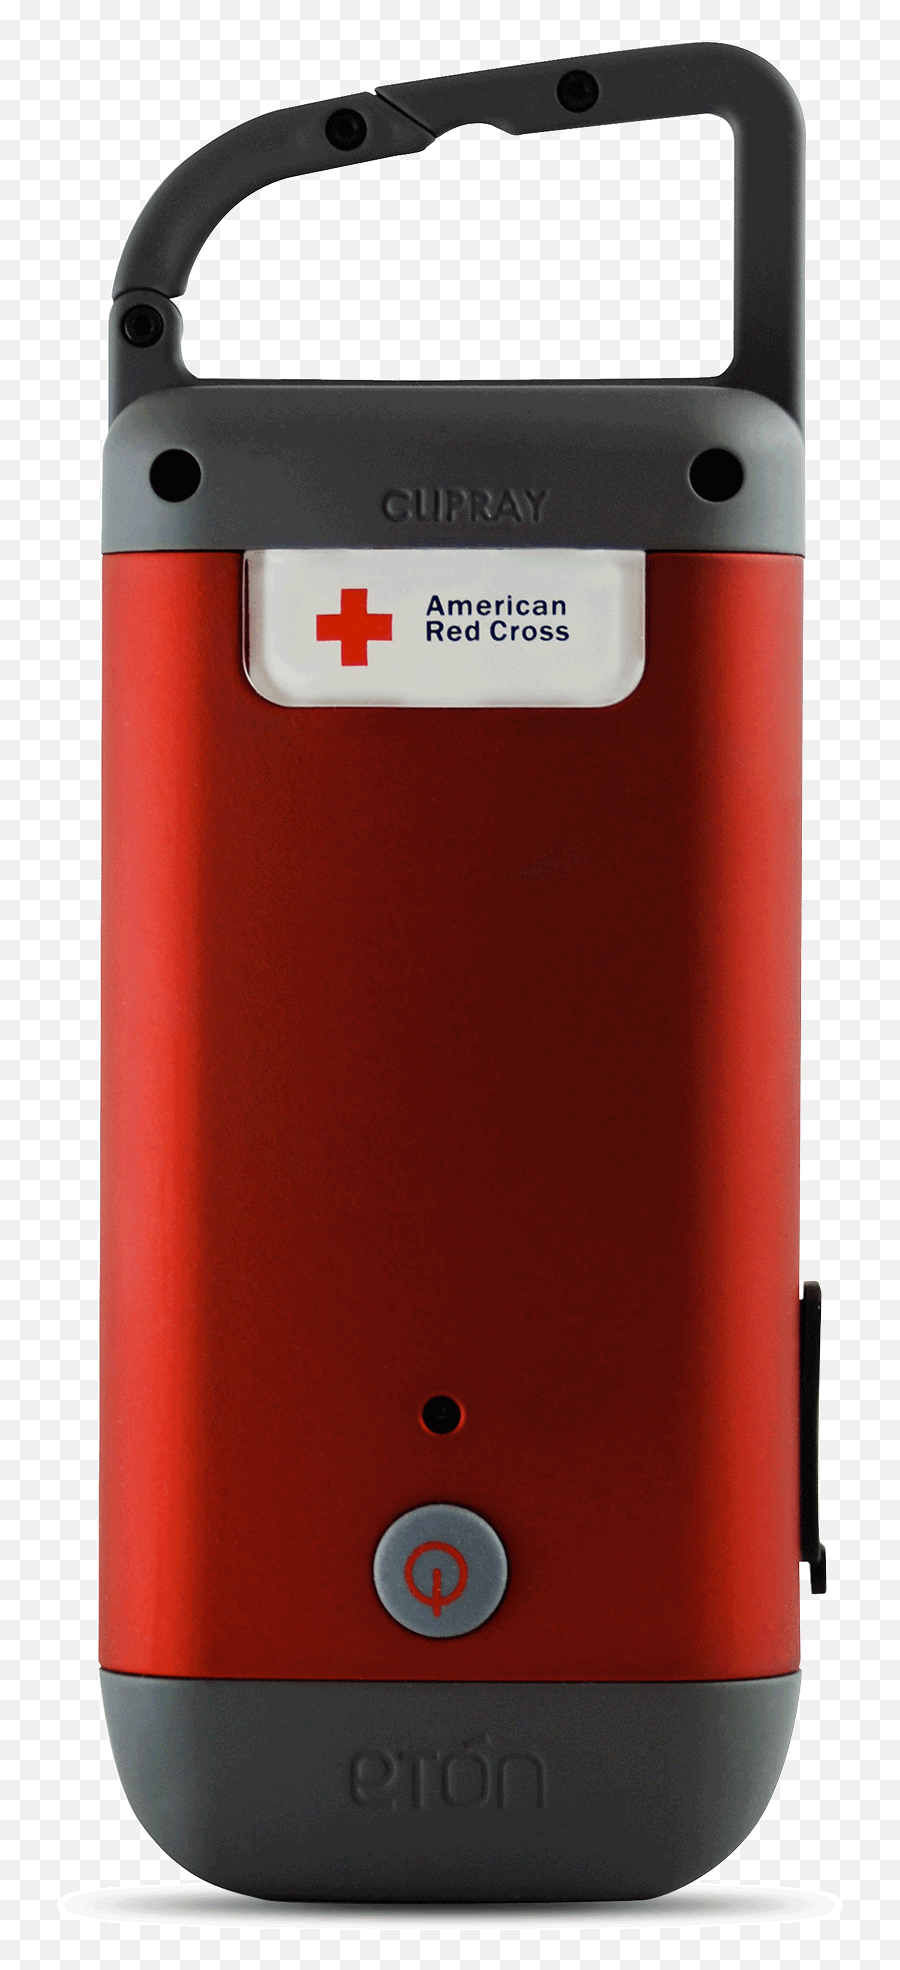 Clipray - Clipray Flashlight Png,How To Remove Red Cross On Battery Icon